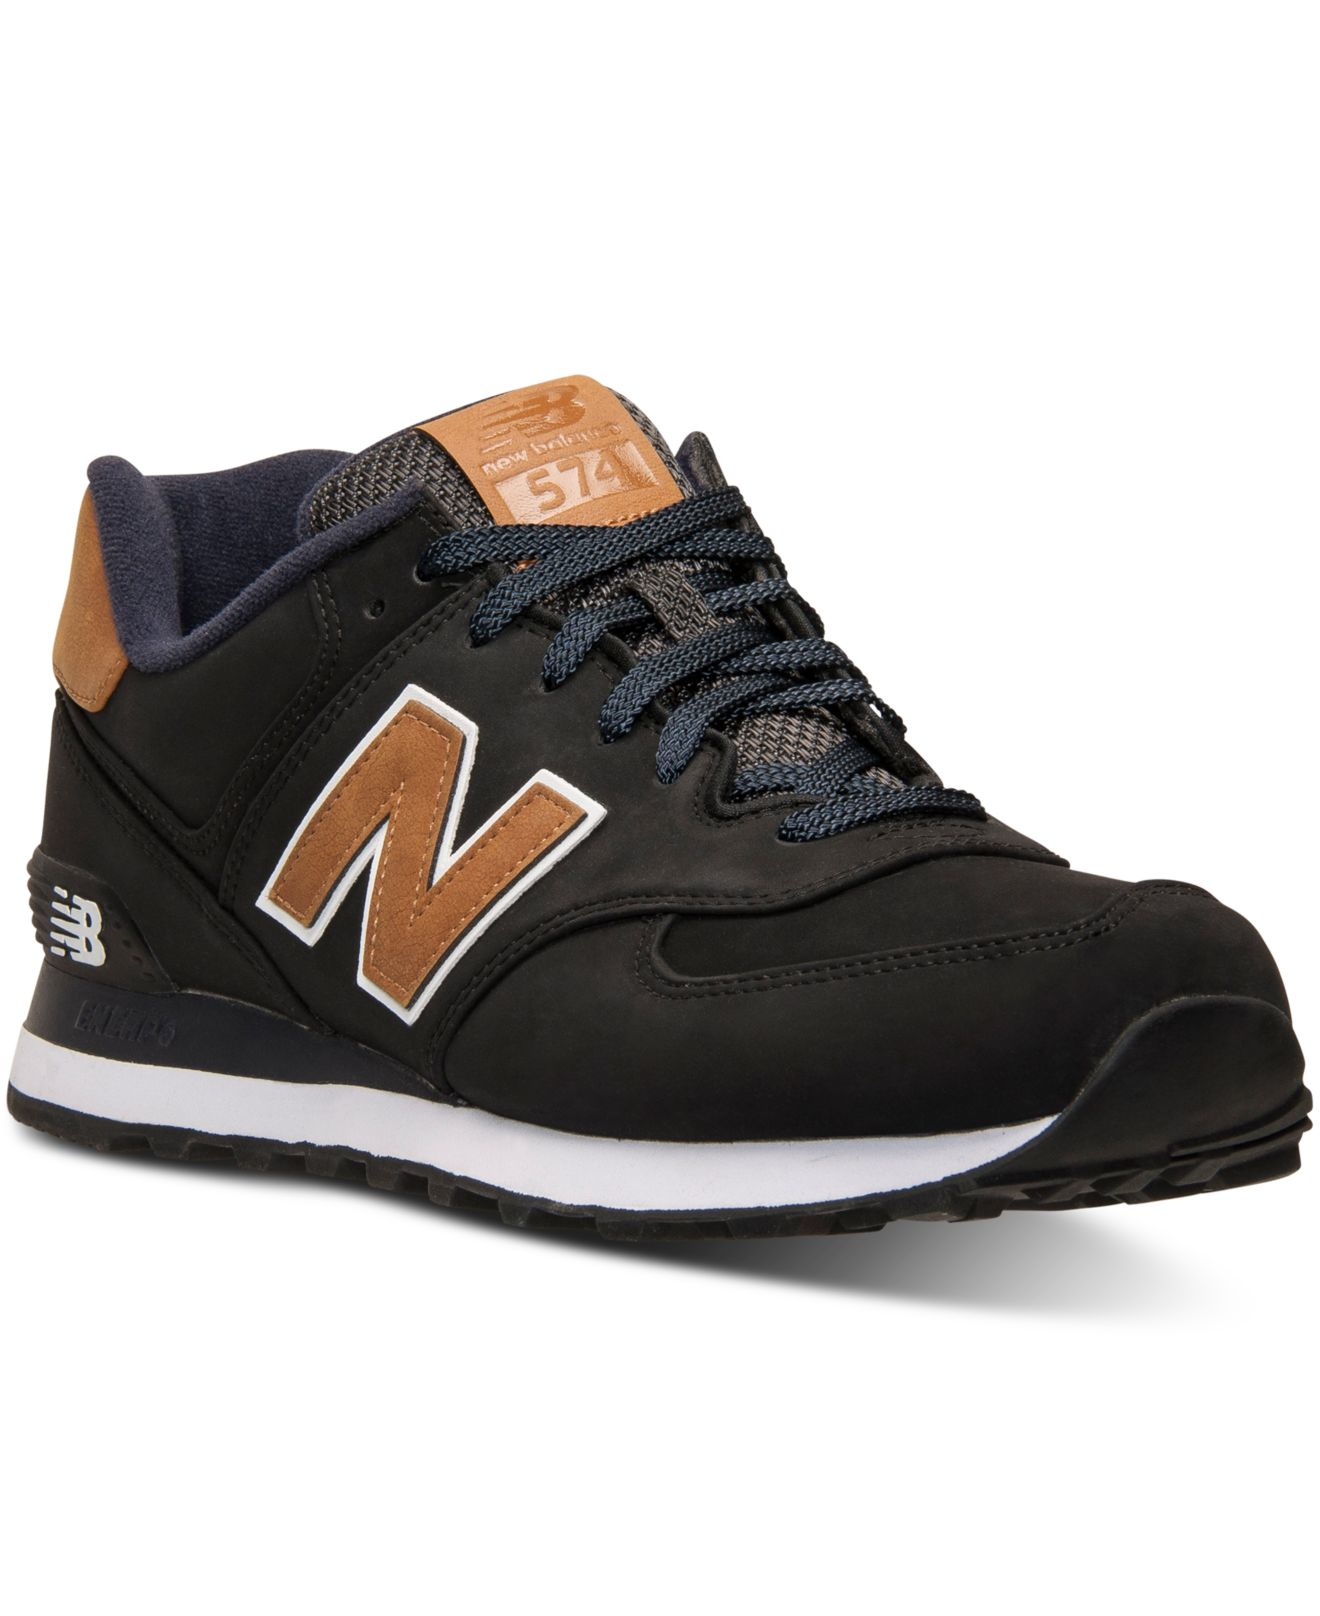 Lyst - New Balance Men's 574 Casual Sneakers From Finish Line in Black